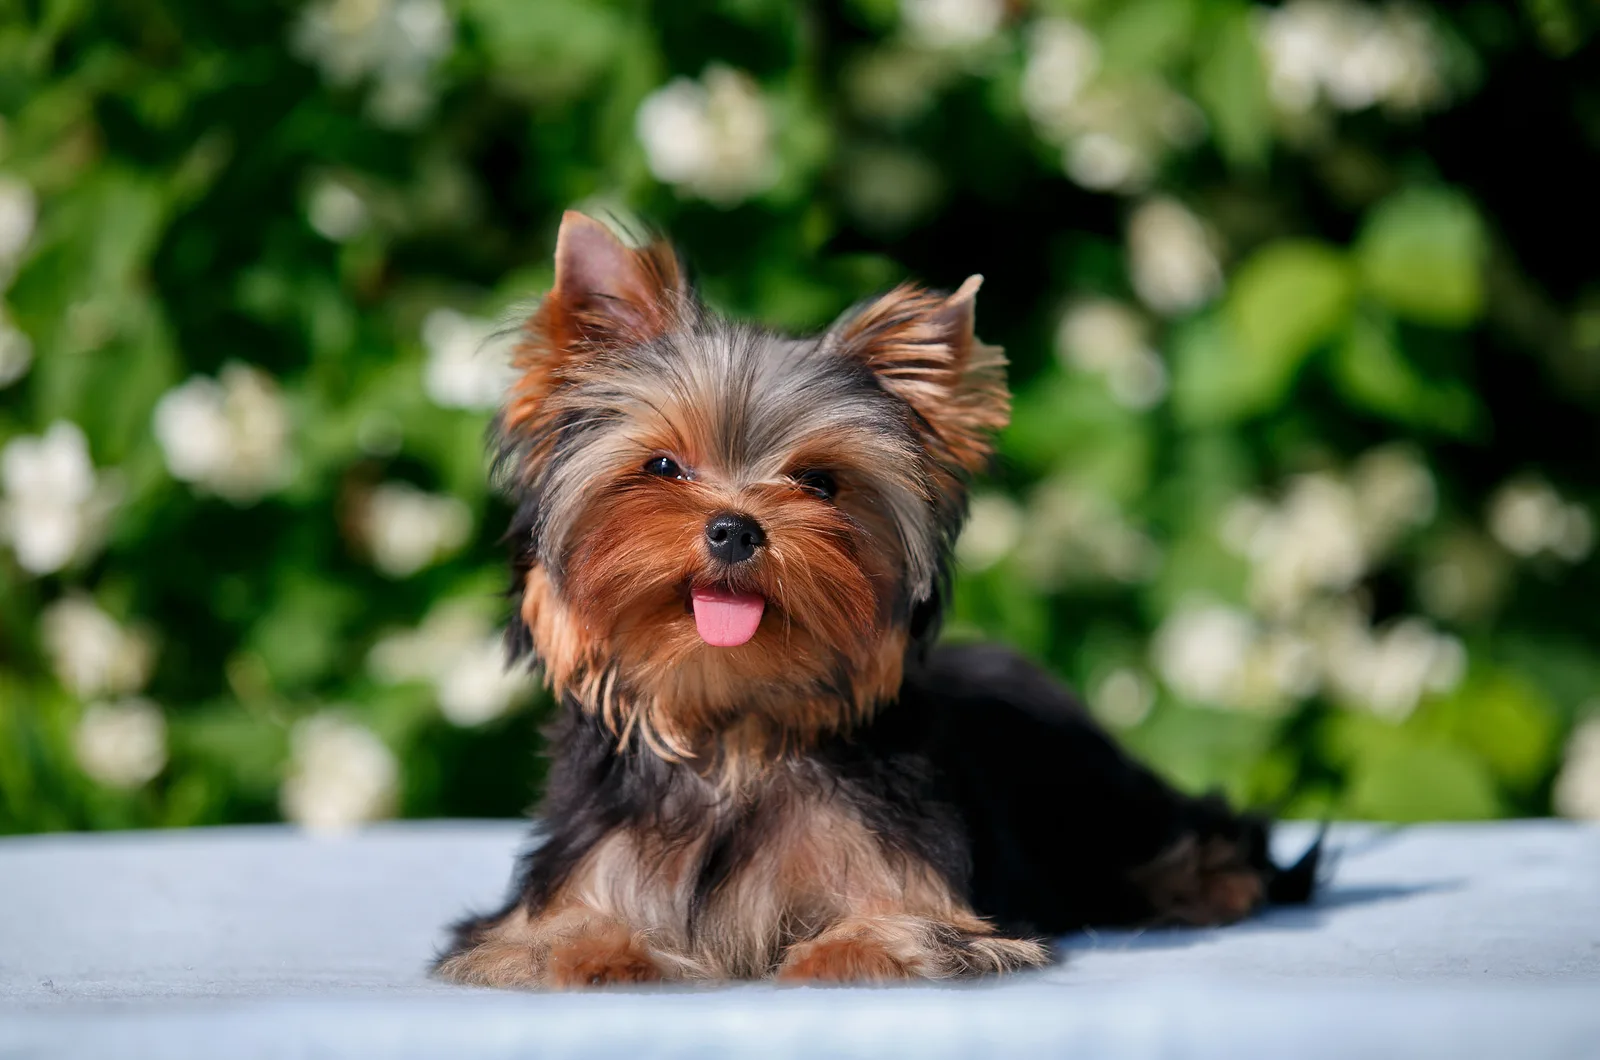 The Yorkshire Terrier puppy lies outstretched